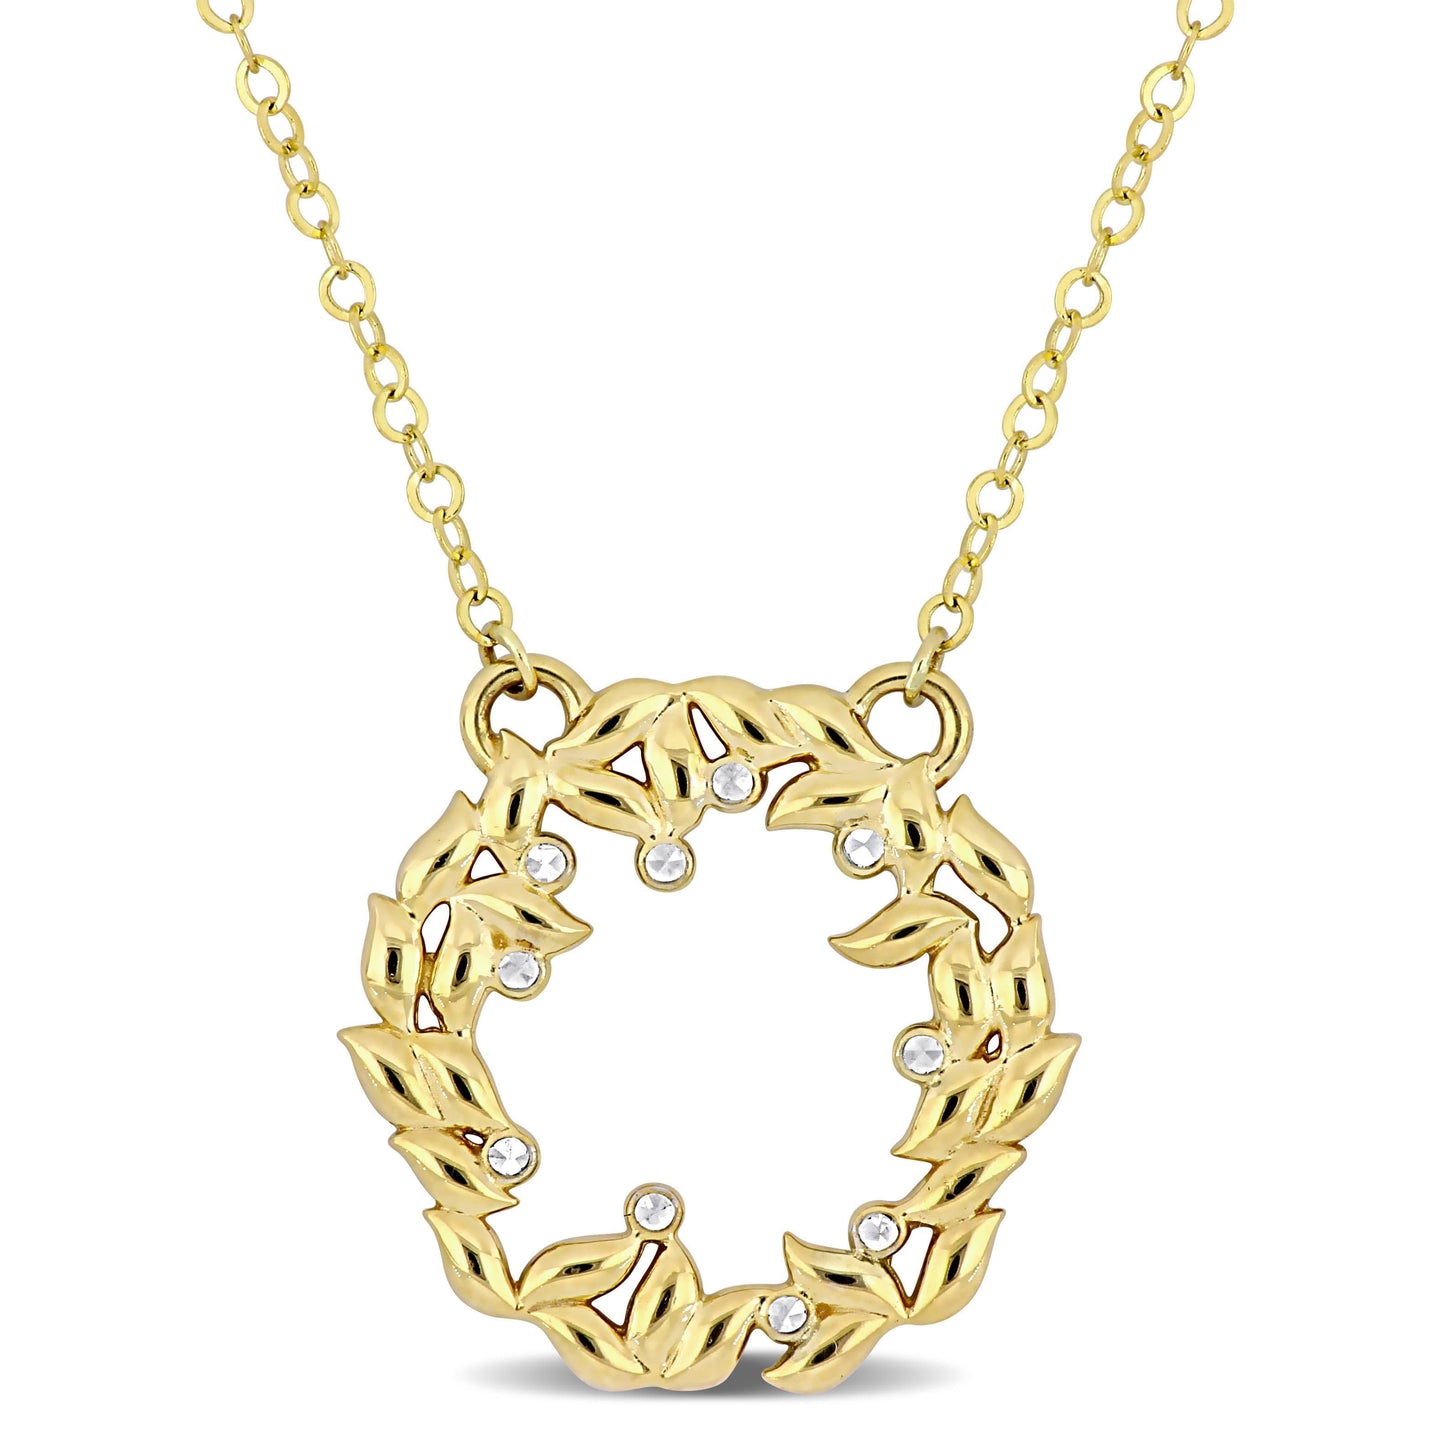 10k Yellow Gold Wreath Necklace